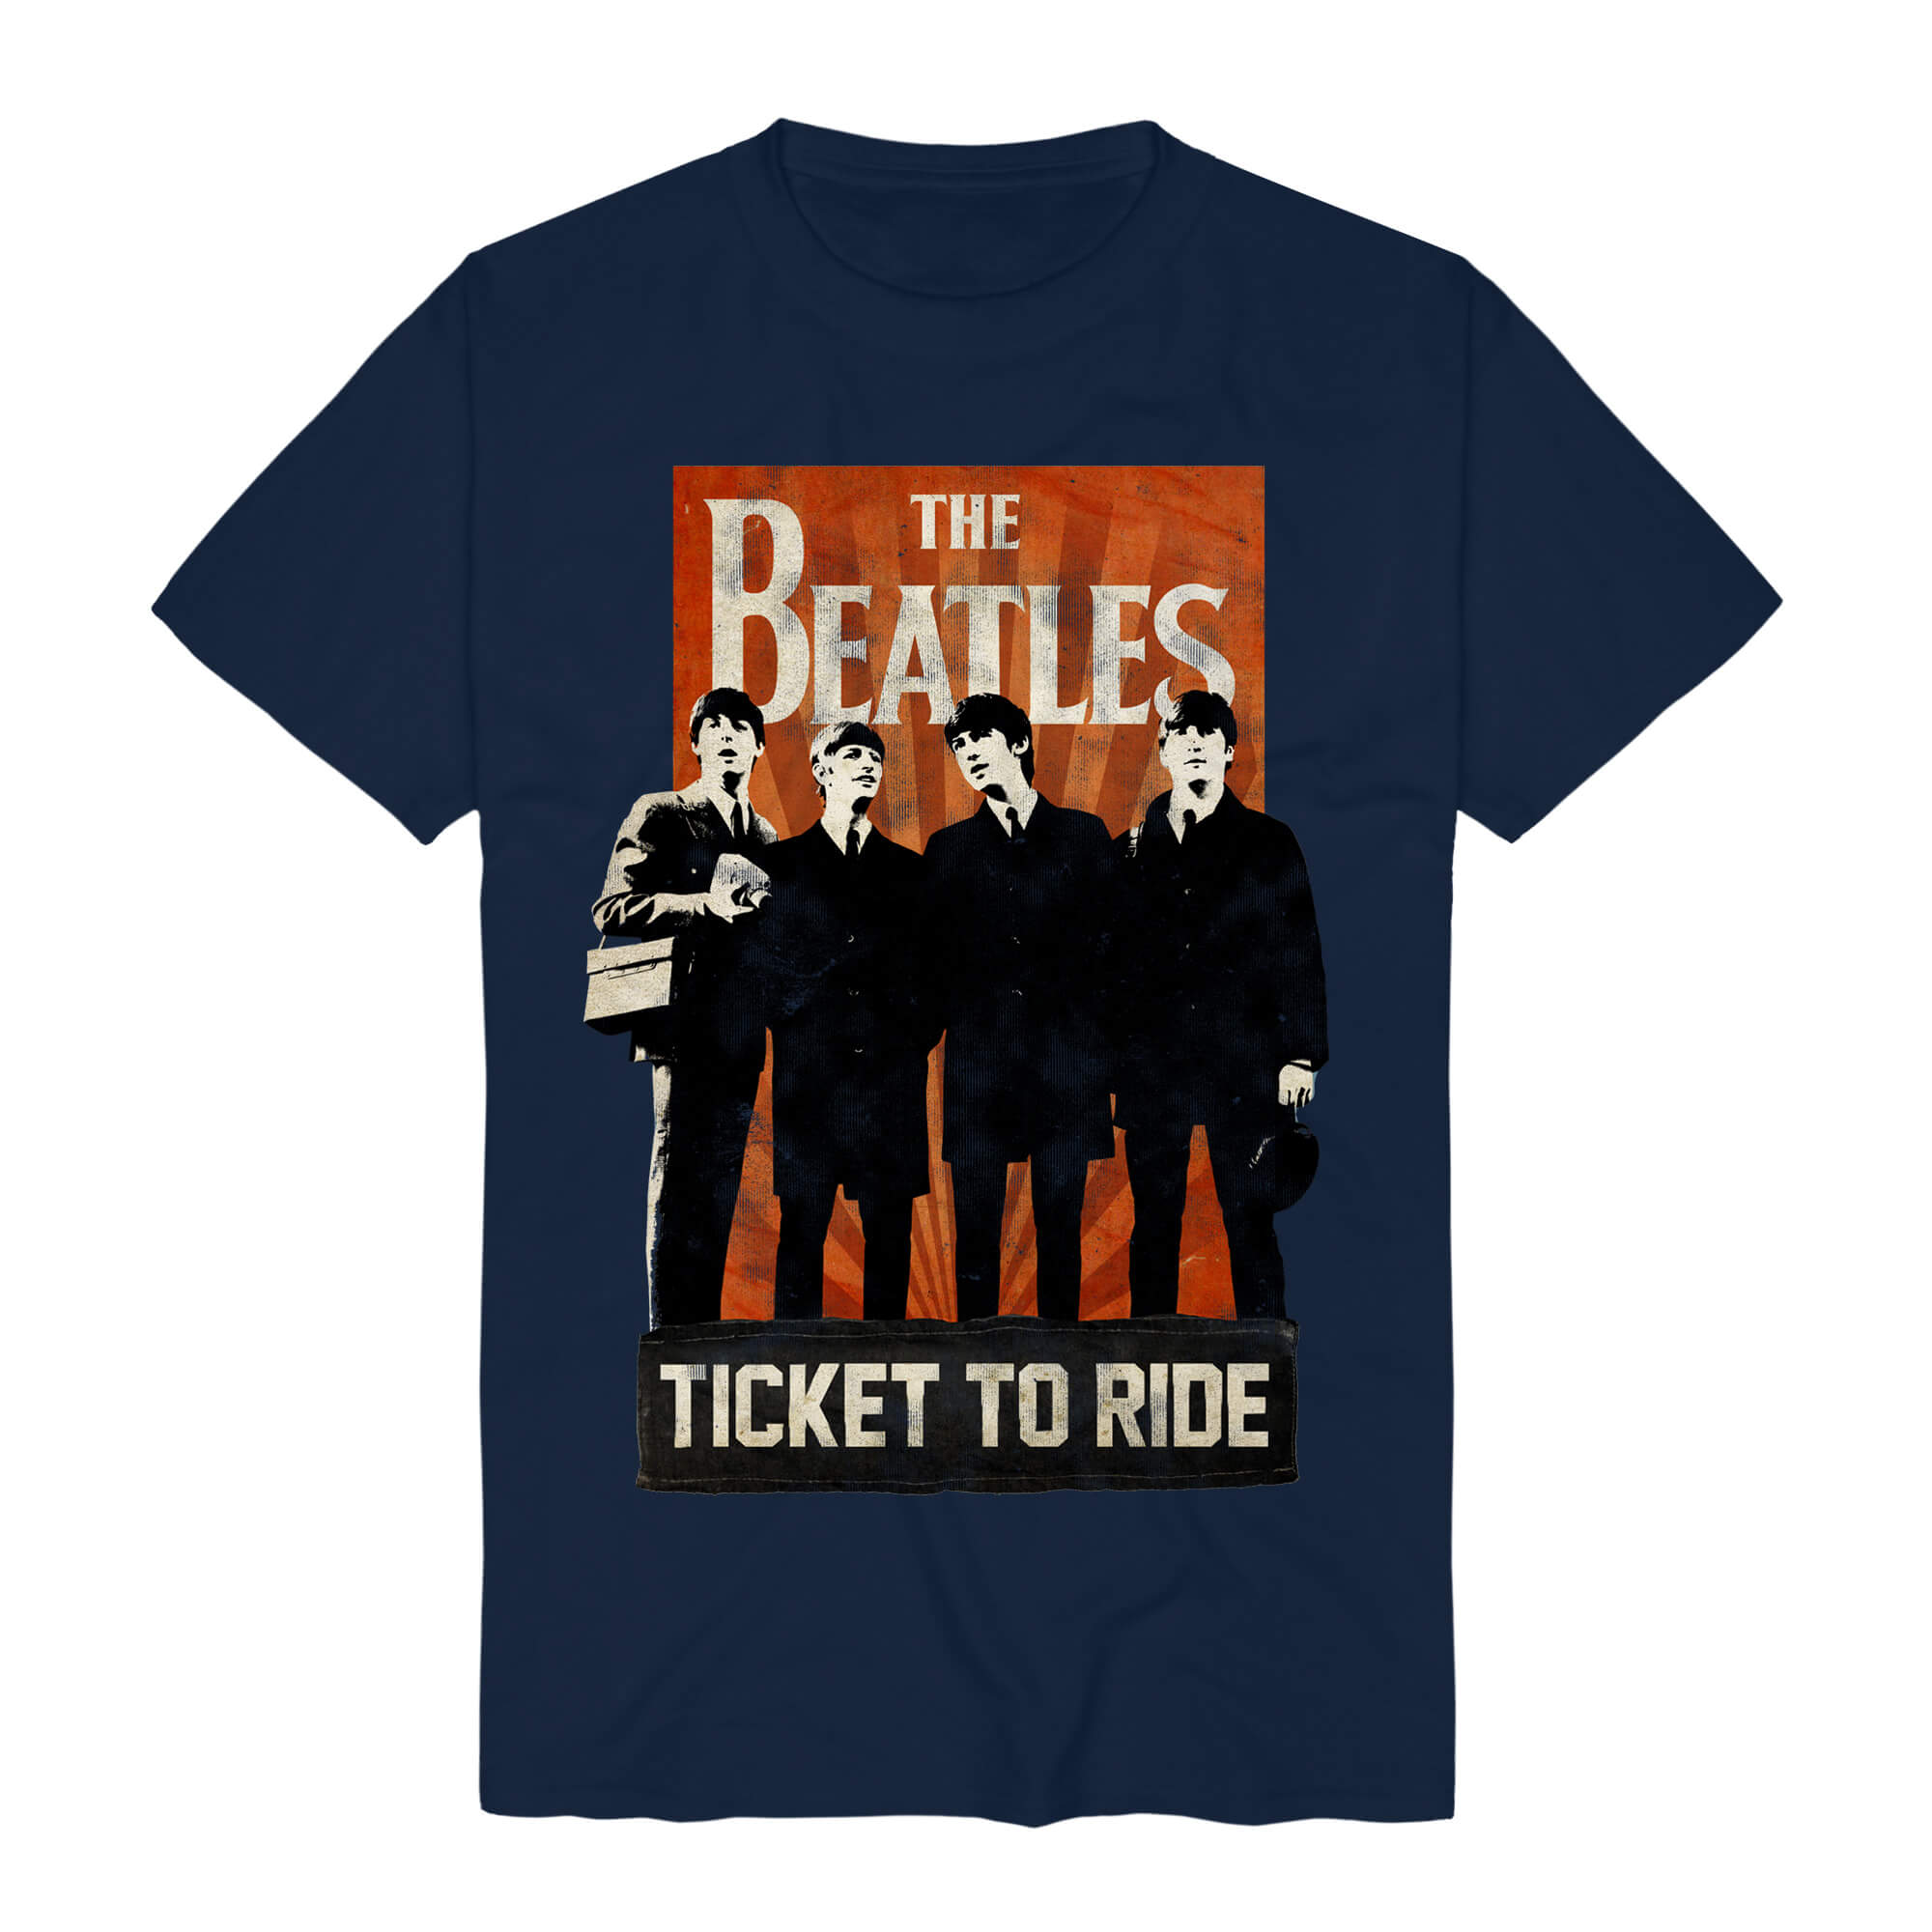 The Beatles - Ticket To Ride (XL)